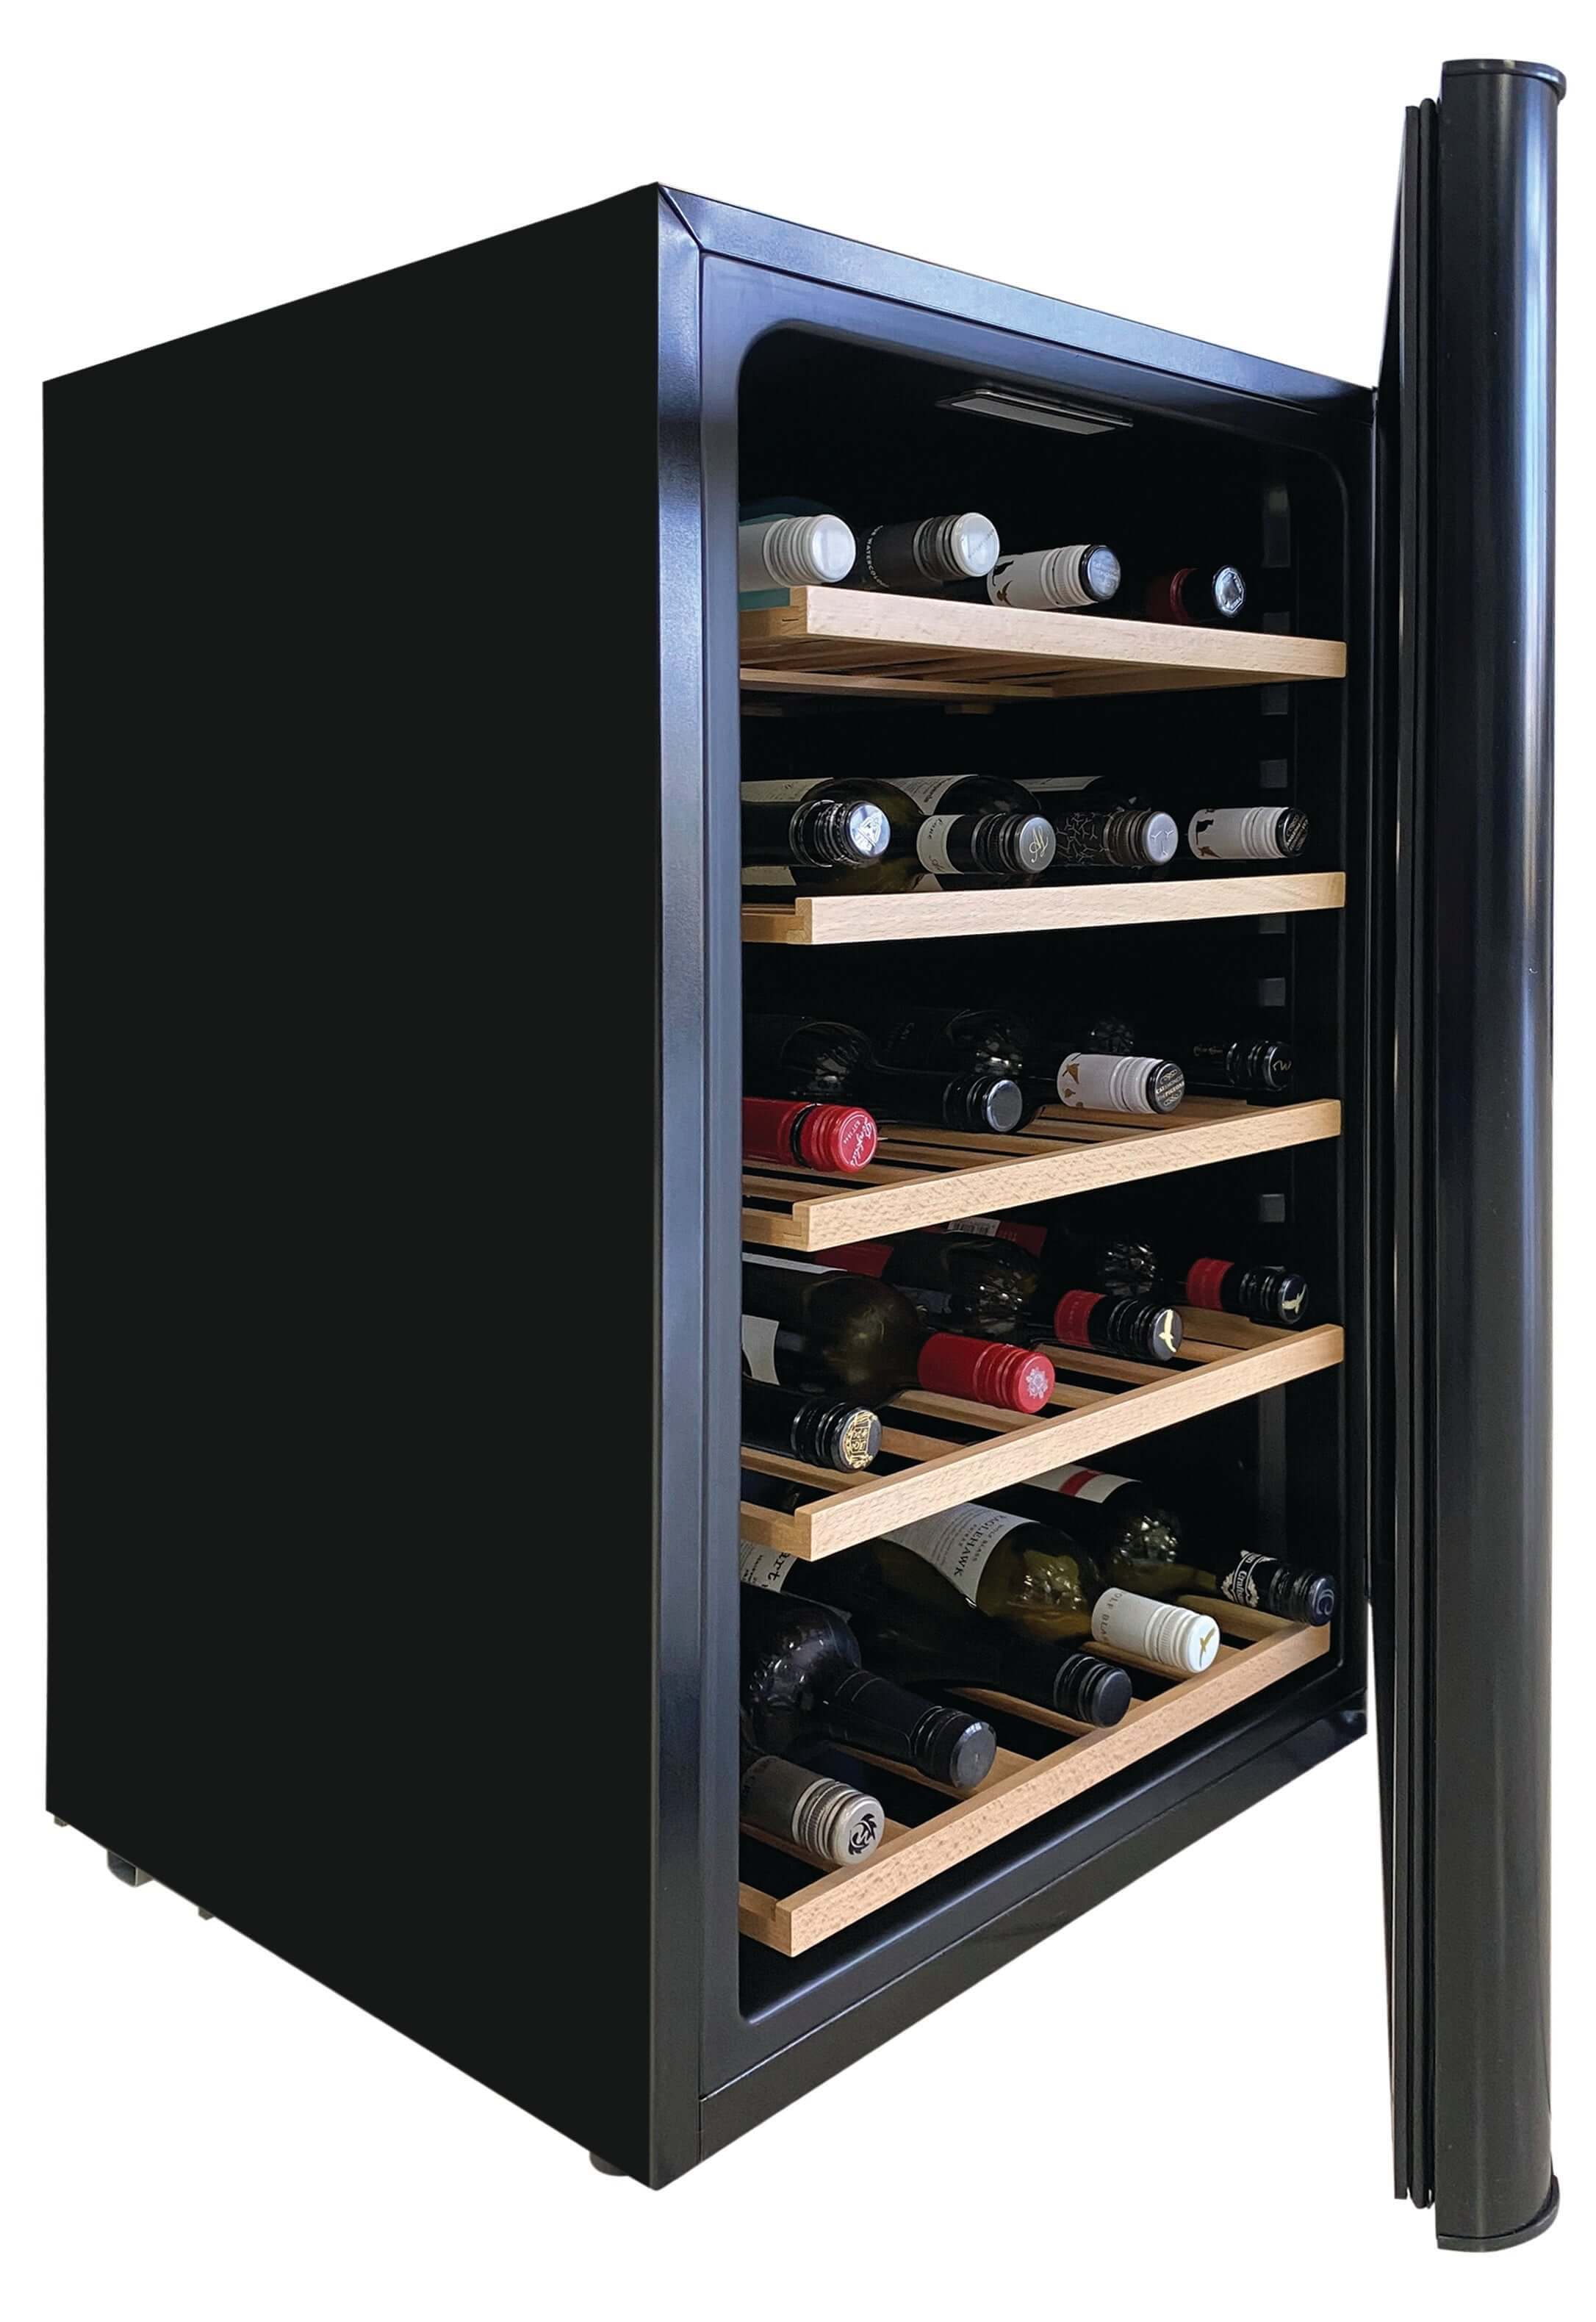 side view of a small wine fridge